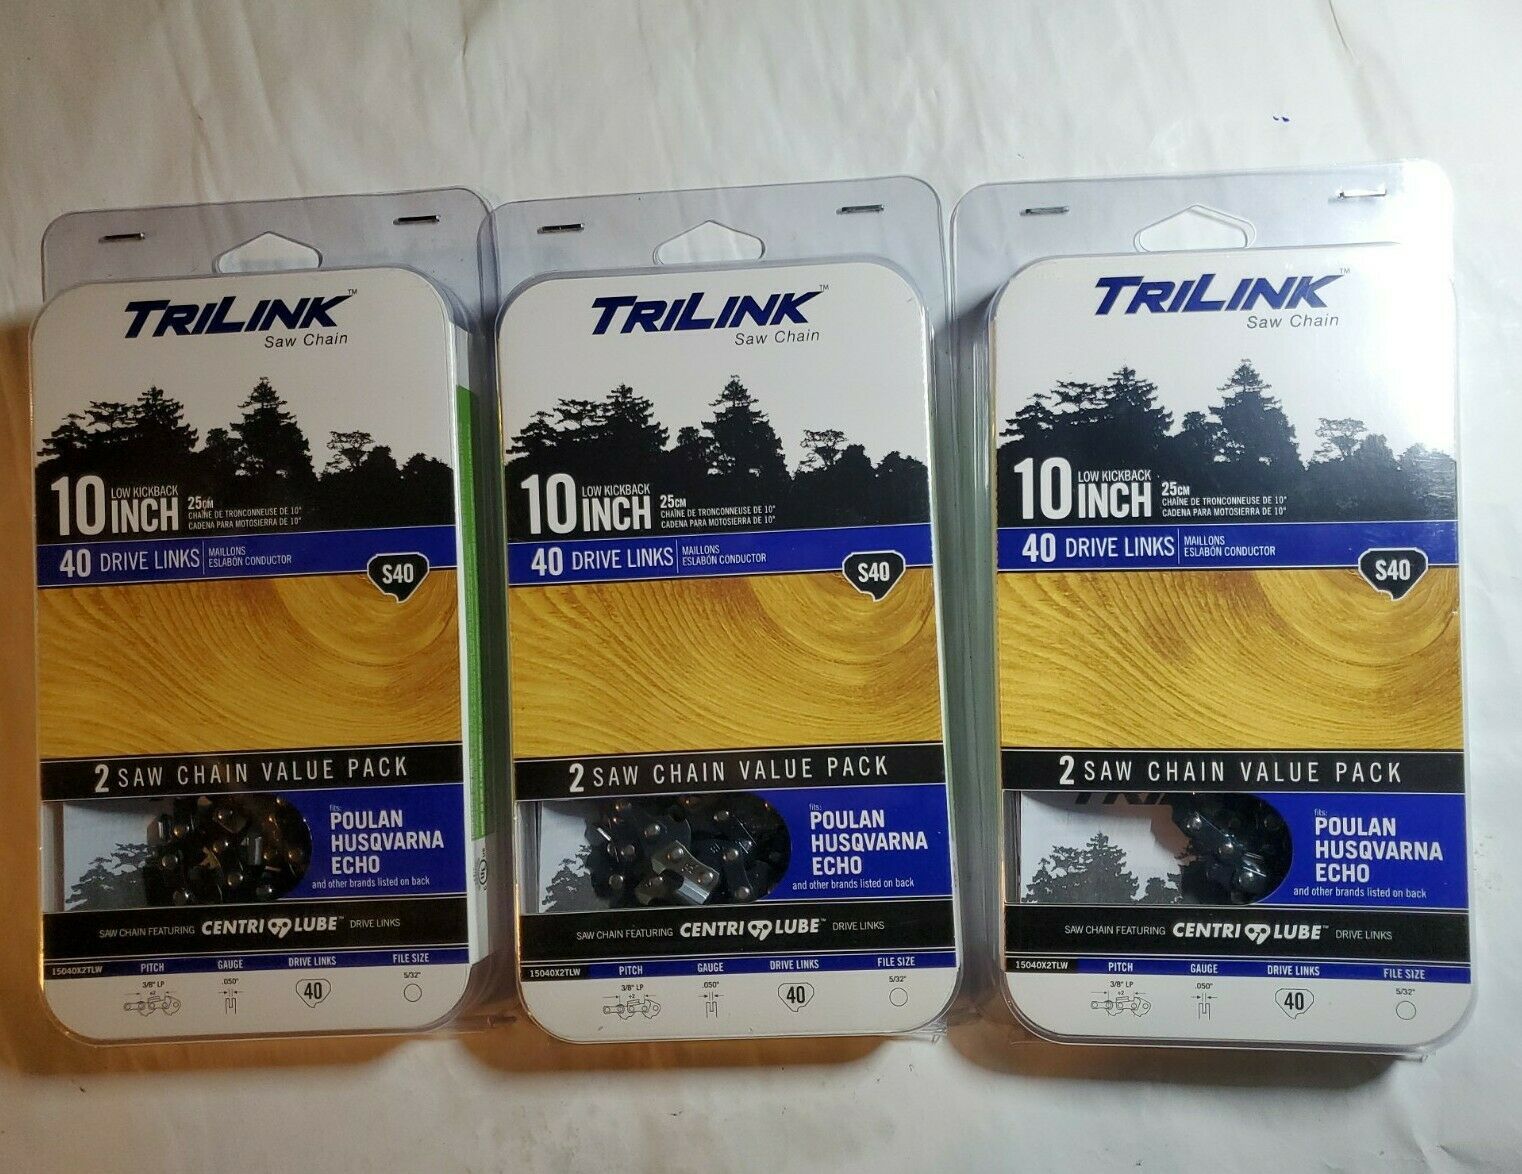 2 Chain Value Pack NEW-10 INCH-TRILINK SAW CHAIN~ S40 Drive Links~Low Kickback